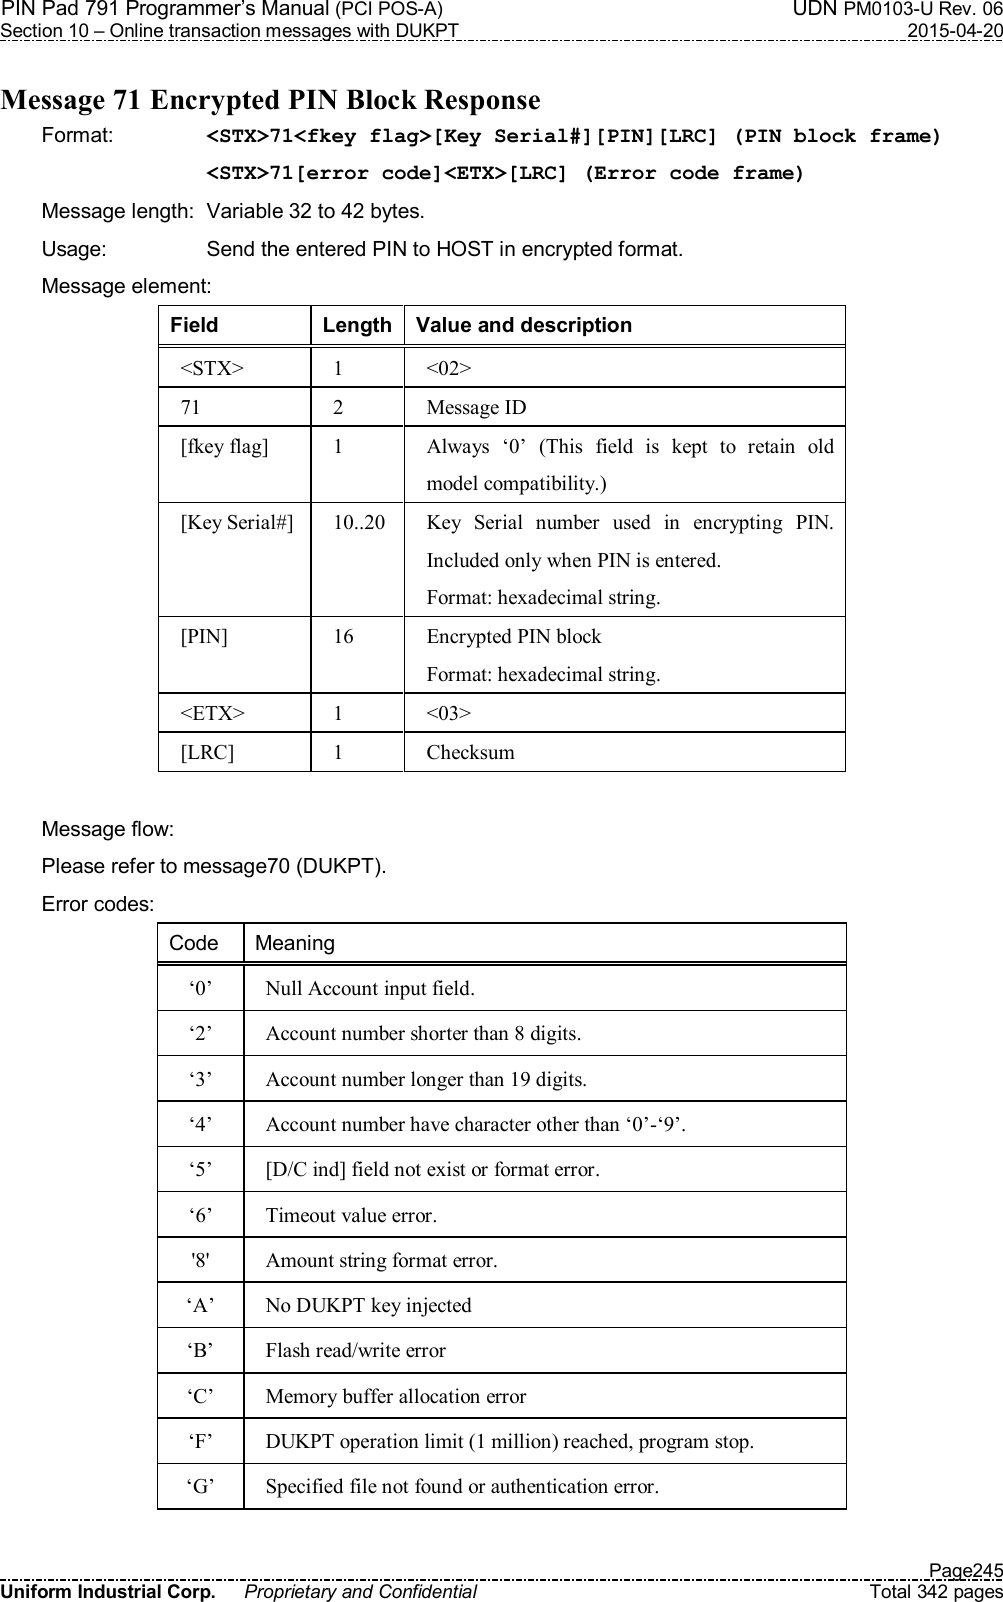 PIN Pad 791 Programmer’s Manual (PCI POS-A)  UDN PM0103-U Rev. 06 Section 10 – Online transaction messages with DUKPT  2015-04-20   Page245 Uniform Industrial Corp.  Proprietary and Confidential  Total 342 pages  Message 71 Encrypted PIN Block Response Format:    &lt;STX&gt;71&lt;fkey flag&gt;[Key Serial#][PIN][LRC] (PIN block frame) &lt;STX&gt;71[error code]&lt;ETX&gt;[LRC] (Error code frame) Message length:  Variable 32 to 42 bytes. Usage:  Send the entered PIN to HOST in encrypted format. Message element: Field  Length Value and description &lt;STX&gt;  1  &lt;02&gt; 71  2  Message ID [fkey flag]  1  Always  ‘0’  (This  field  is  kept  to  retain  old model compatibility.) [Key Serial#] 10..20  Key  Serial  number  used  in  encrypting  PIN. Included only when PIN is entered. Format: hexadecimal string. [PIN]  16  Encrypted PIN block Format: hexadecimal string. &lt;ETX&gt;  1  &lt;03&gt; [LRC]  1  Checksum  Message flow:   Please refer to message70 (DUKPT). Error codes: Code  Meaning ‘0’  Null Account input field. ‘2’  Account number shorter than 8 digits. ‘3’  Account number longer than 19 digits. ‘4’  Account number have character other than ‘0’-‘9’. ‘5’  [D/C ind] field not exist or format error. ‘6’  Timeout value error. &apos;8&apos;  Amount string format error. ‘A’  No DUKPT key injected ‘B’  Flash read/write error ‘C’  Memory buffer allocation error ‘F’  DUKPT operation limit (1 million) reached, program stop. ‘G’  Specified file not found or authentication error.  